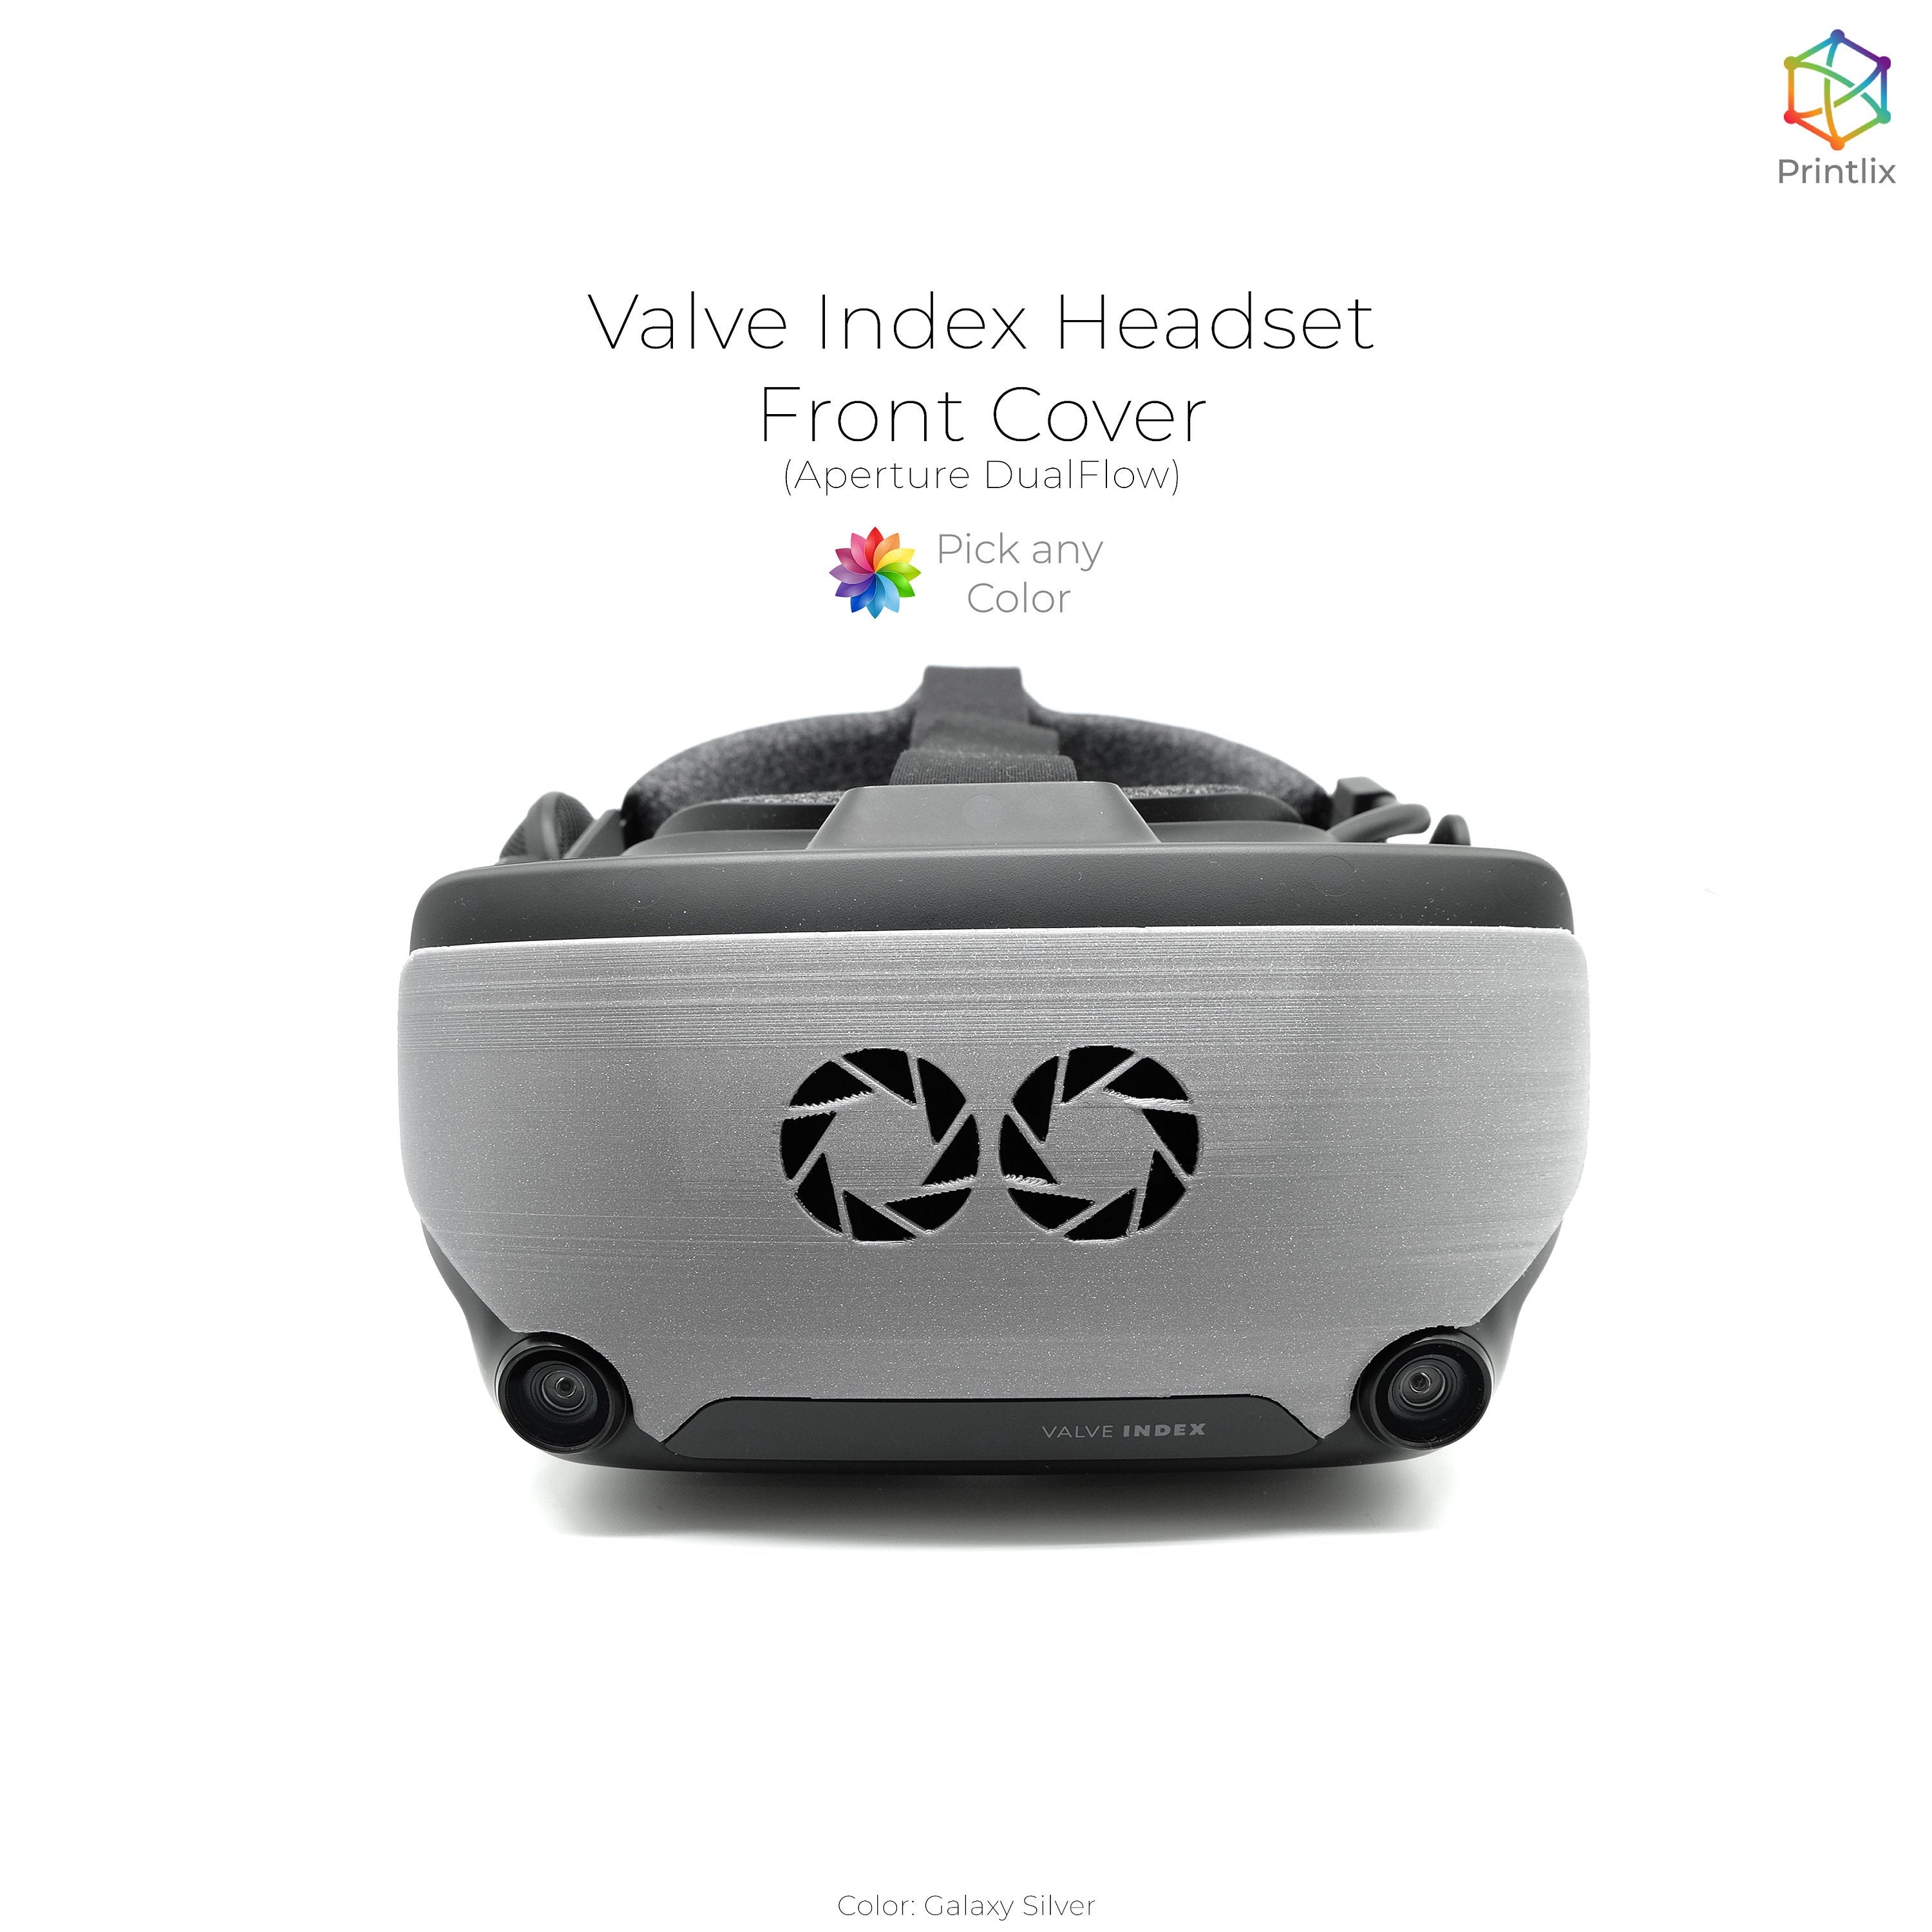 Valve Index Headset Front Cover